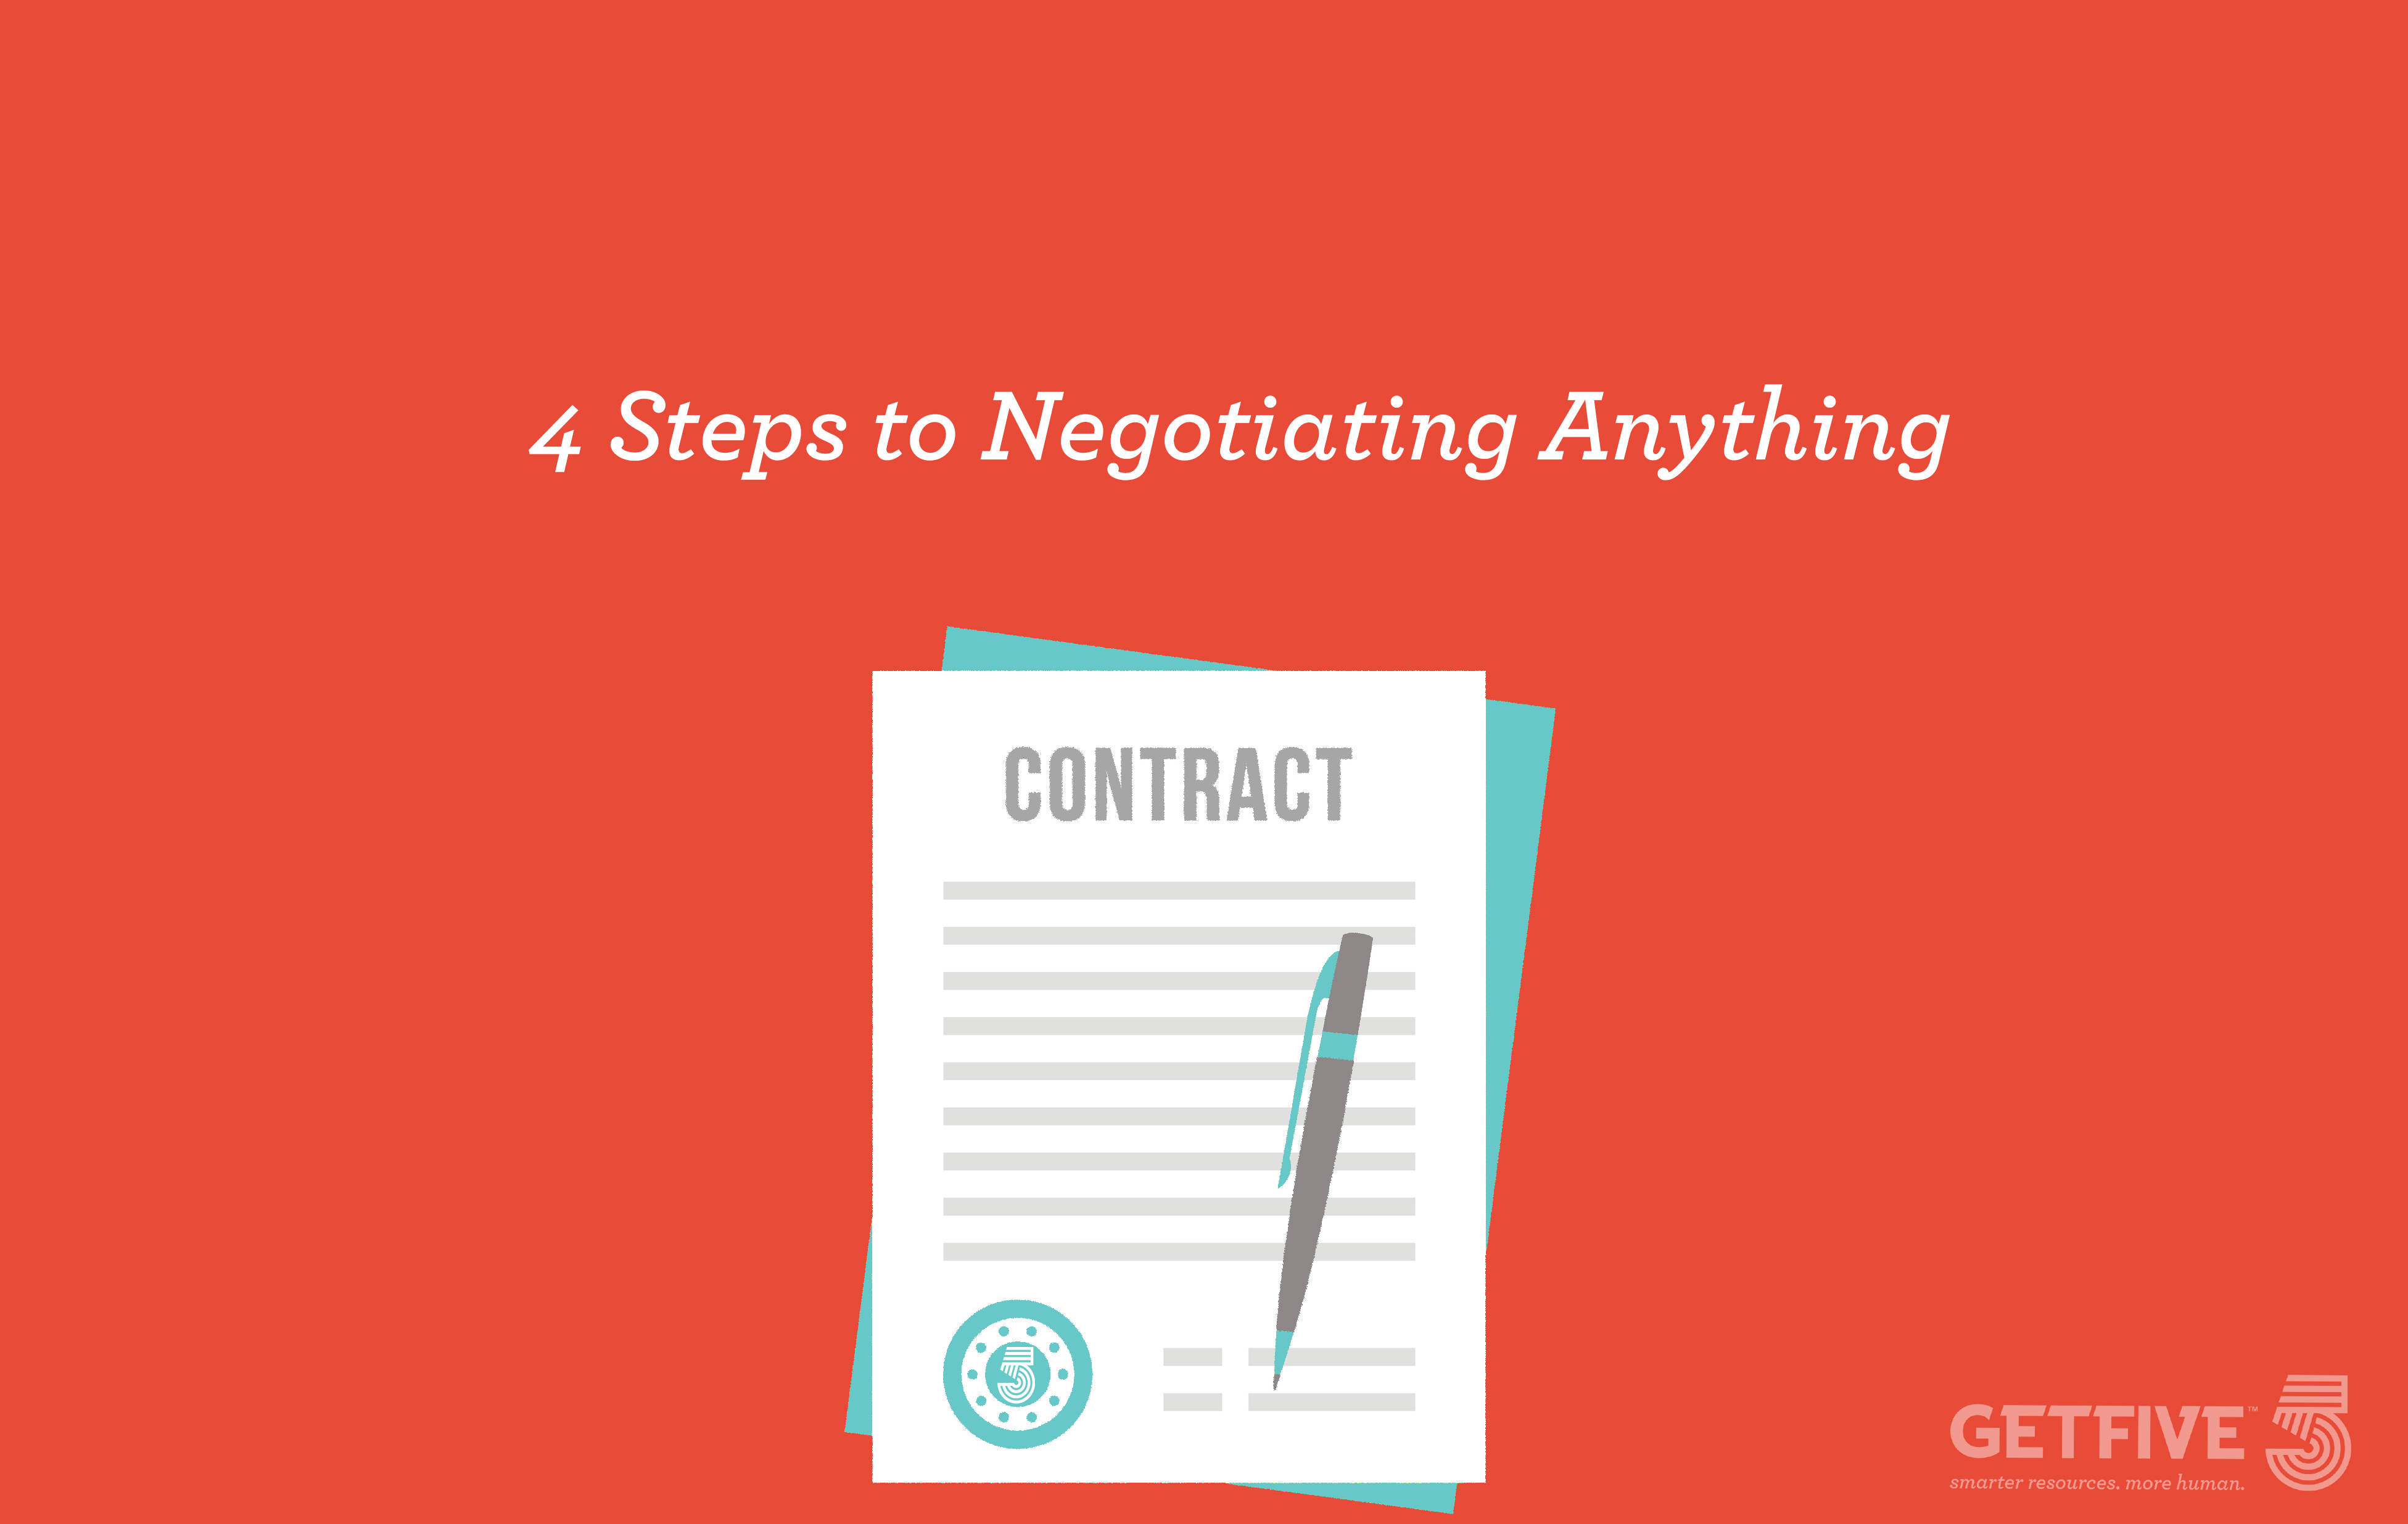 4 Steps to Negotiating Anything